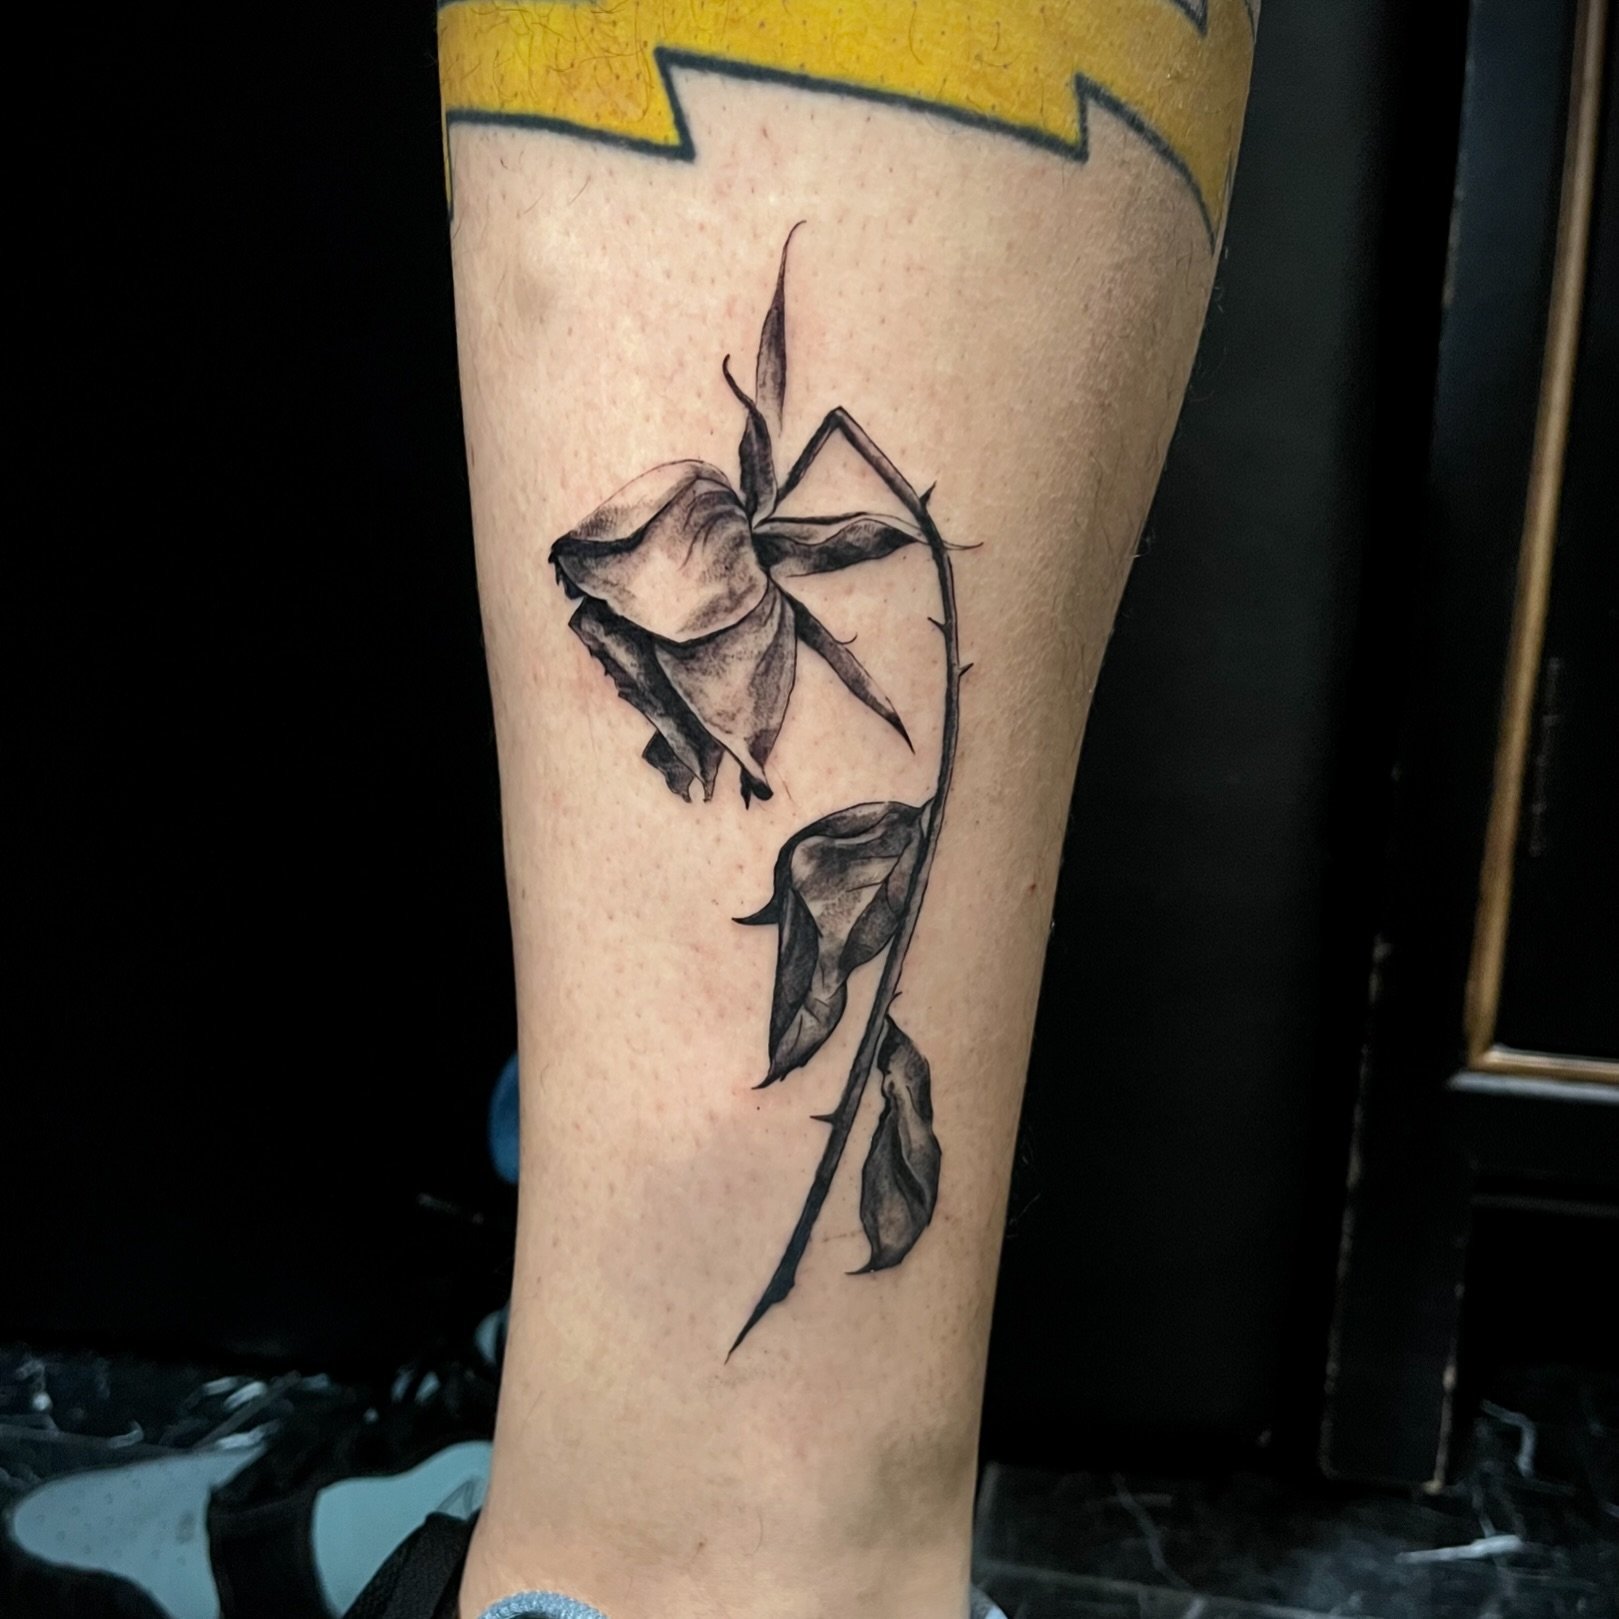 wilted rose for Chris from the other day. What a fun walk in request! Thank you!
@firstclassnyc st